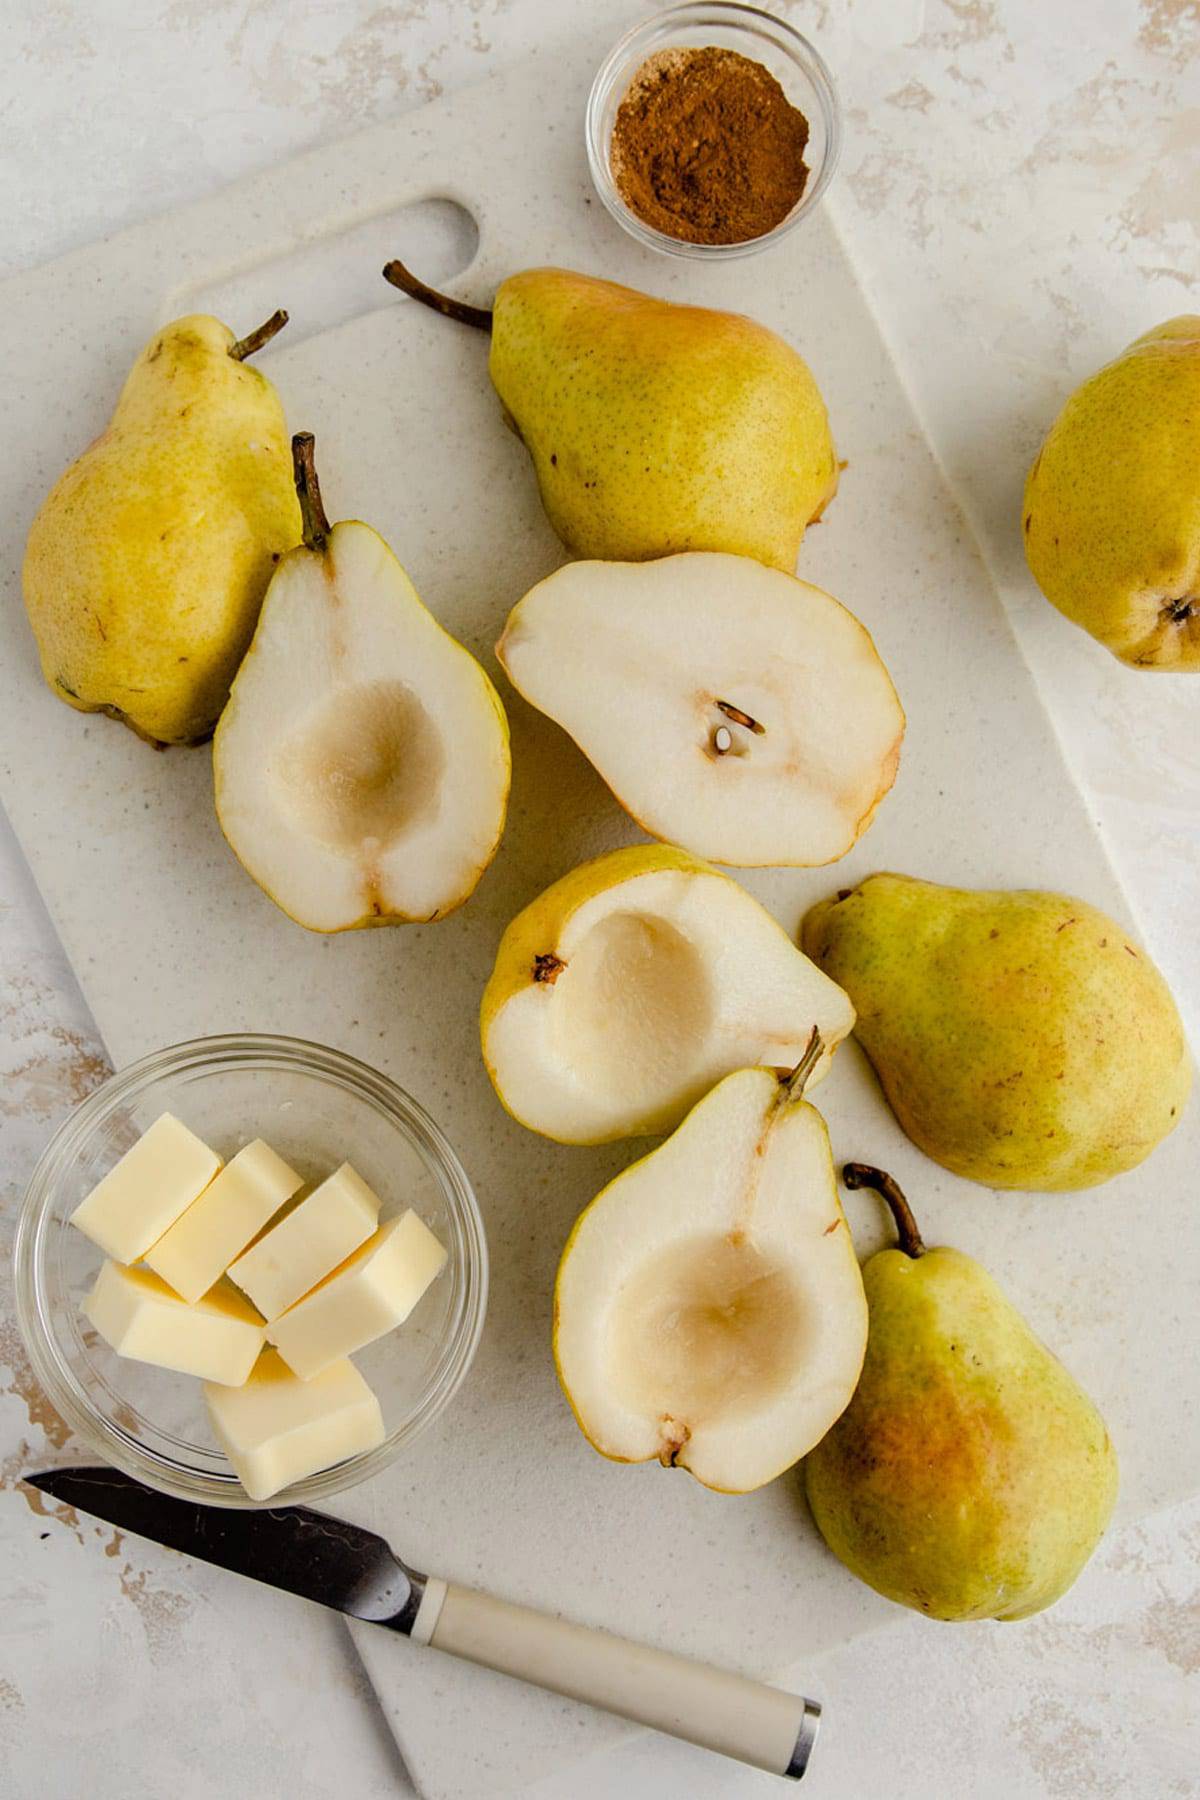 Pears being prepped for baking.